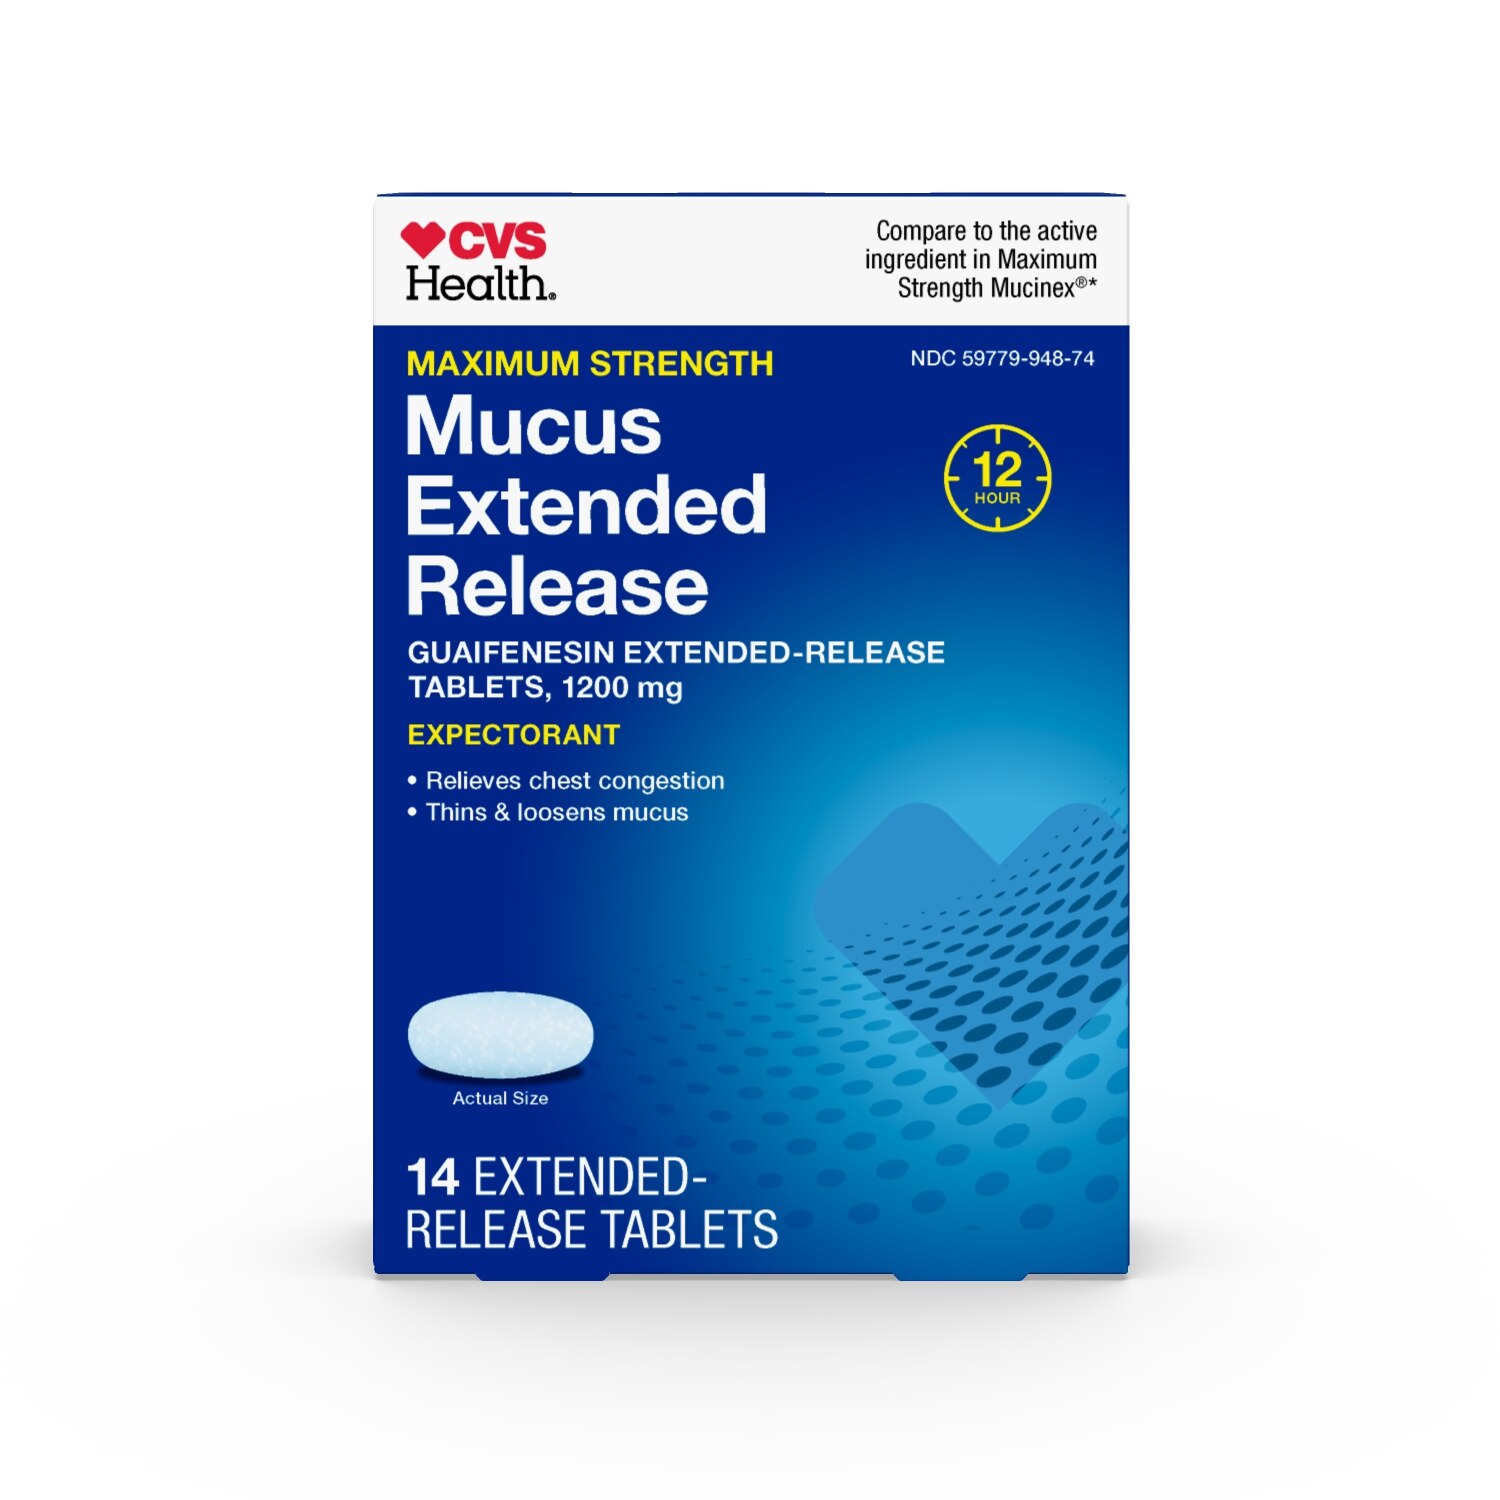 cvs-health-maximum-strength-mucus-extended-release-tablets-generic